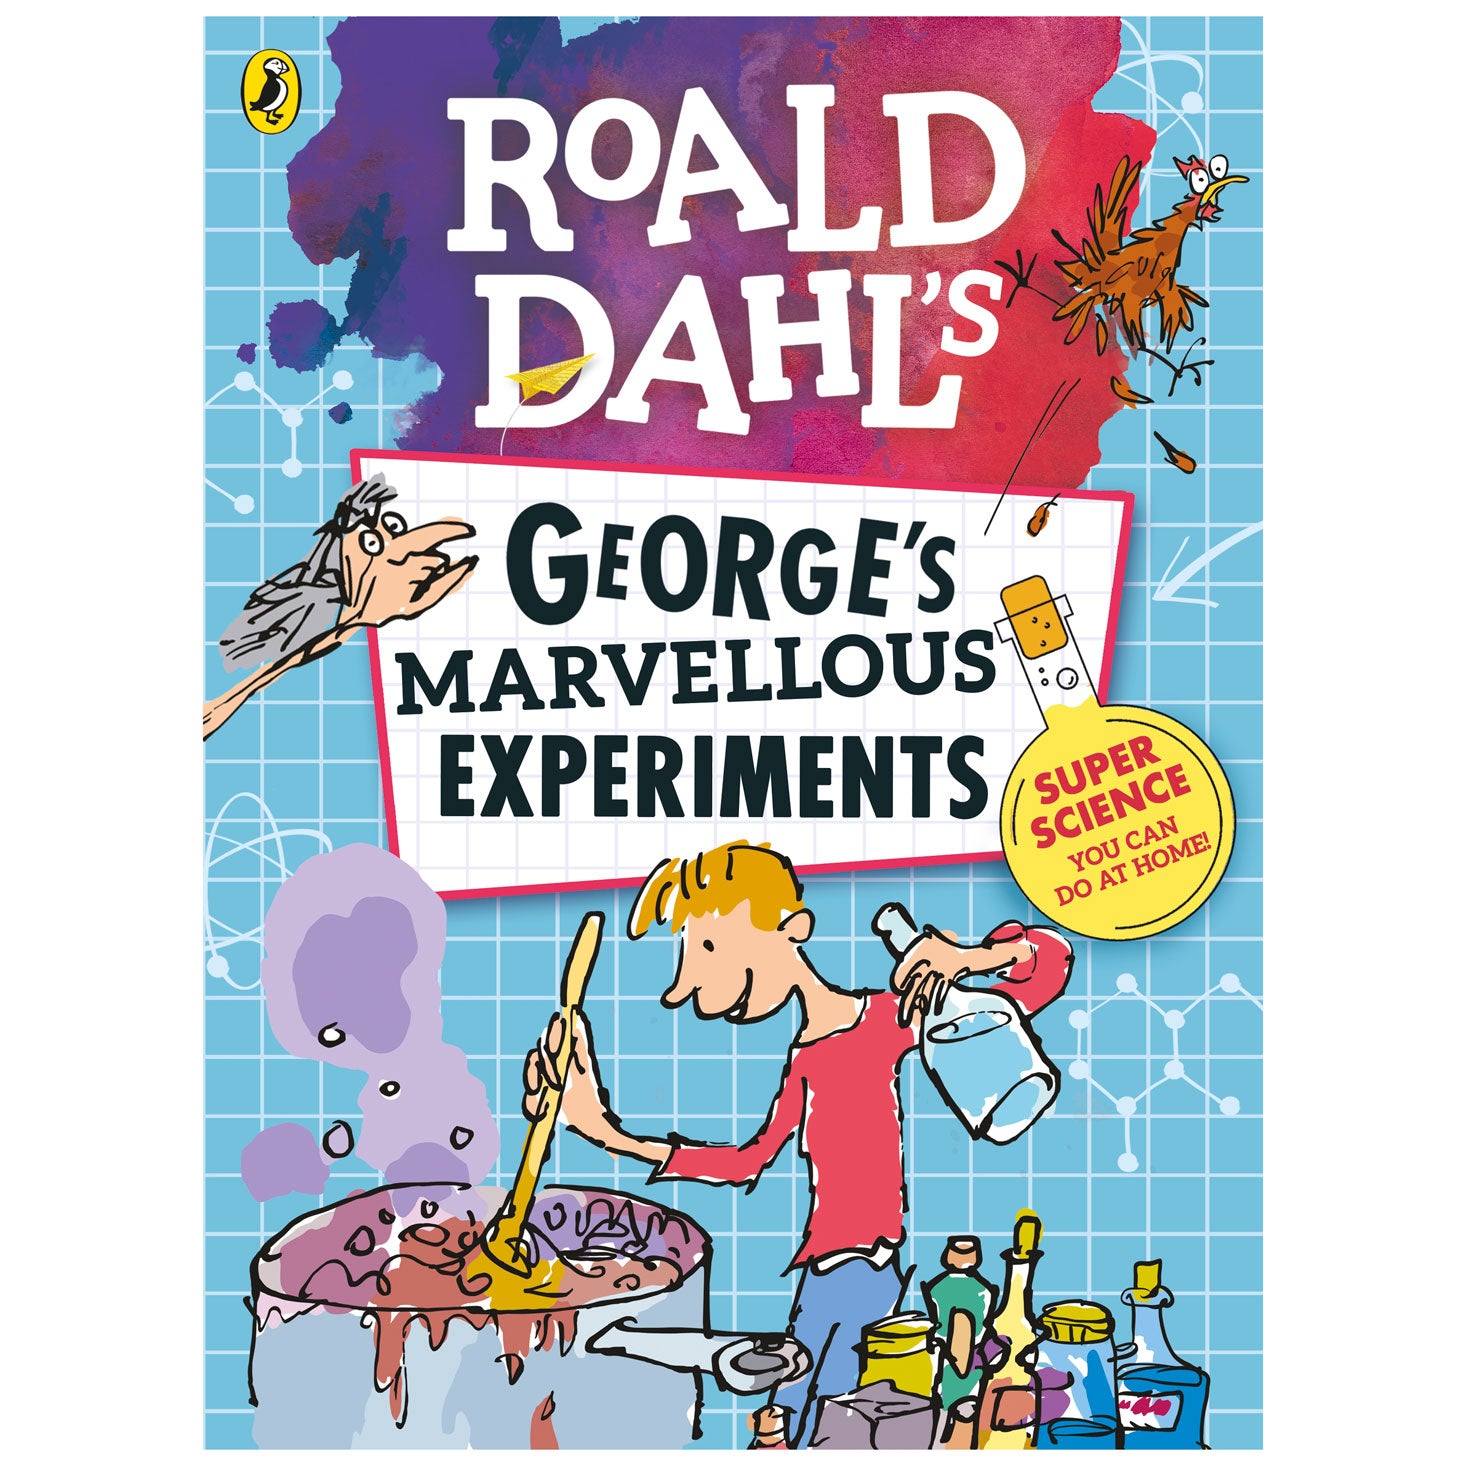 George's Marvellous Experiements science book based on George's Marvellous Medicine by Roald Dahl with illustrations by Quentin Blake